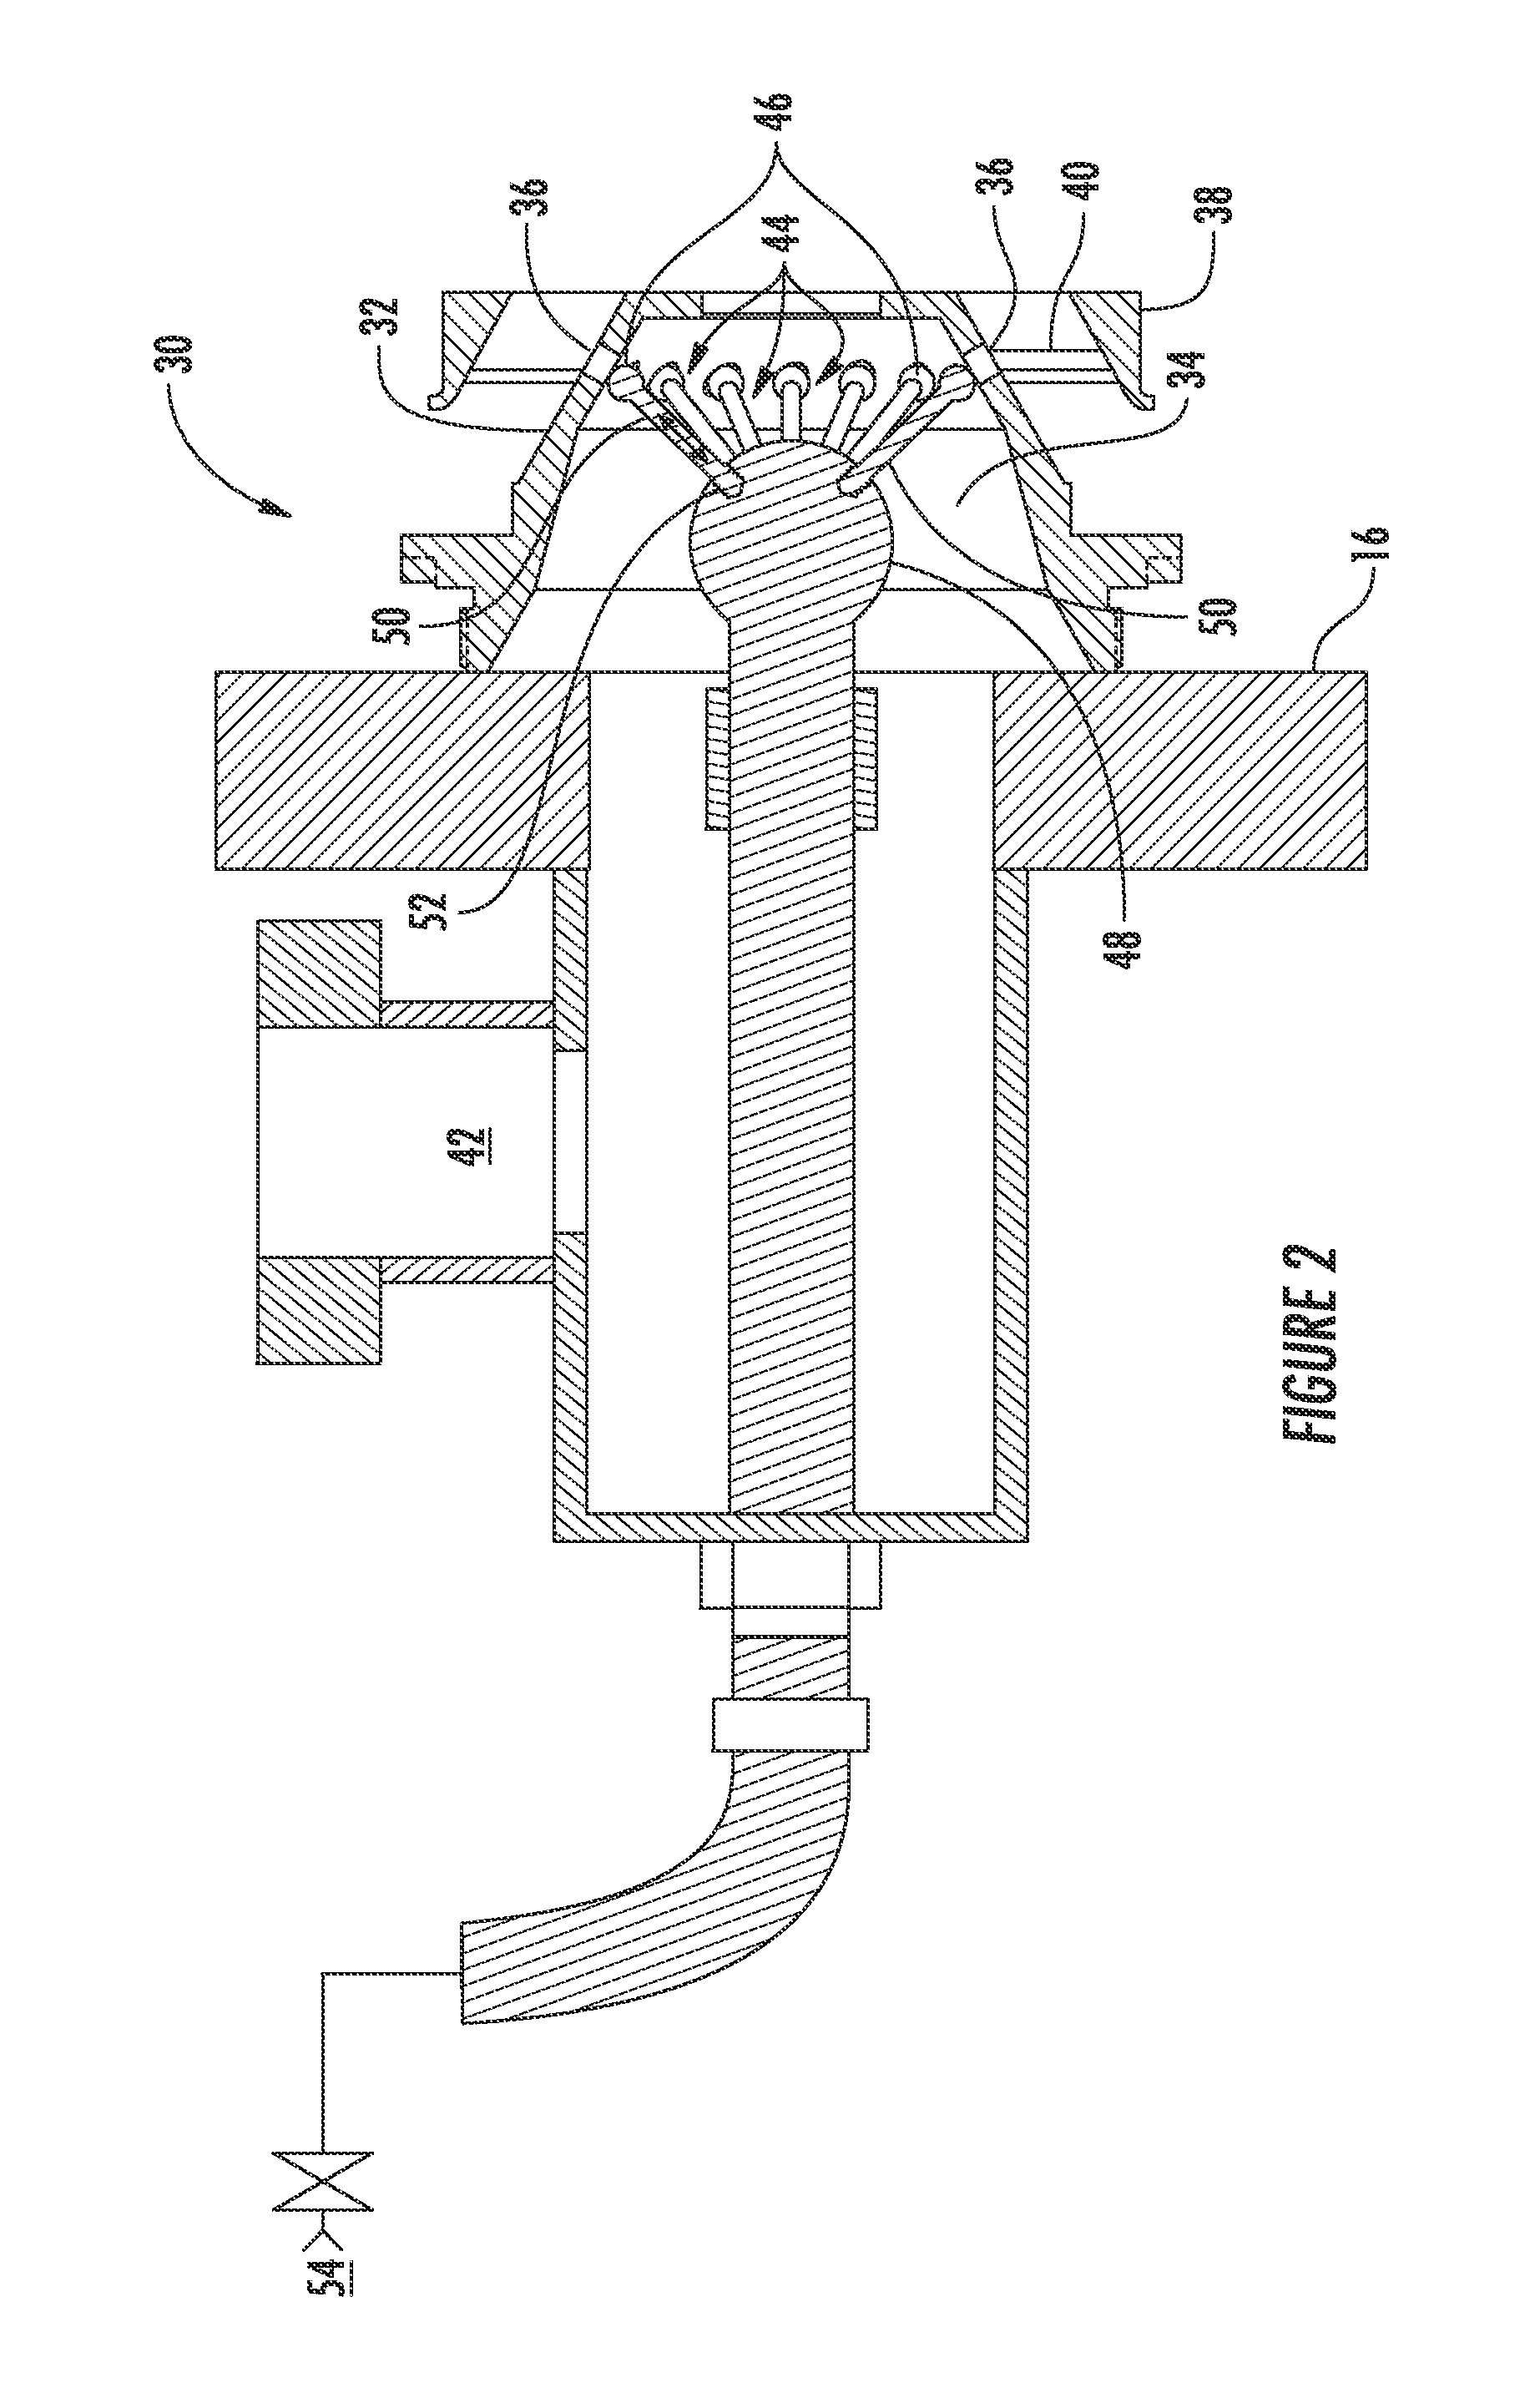 Apparatus and method for modifying a combustor nozzle